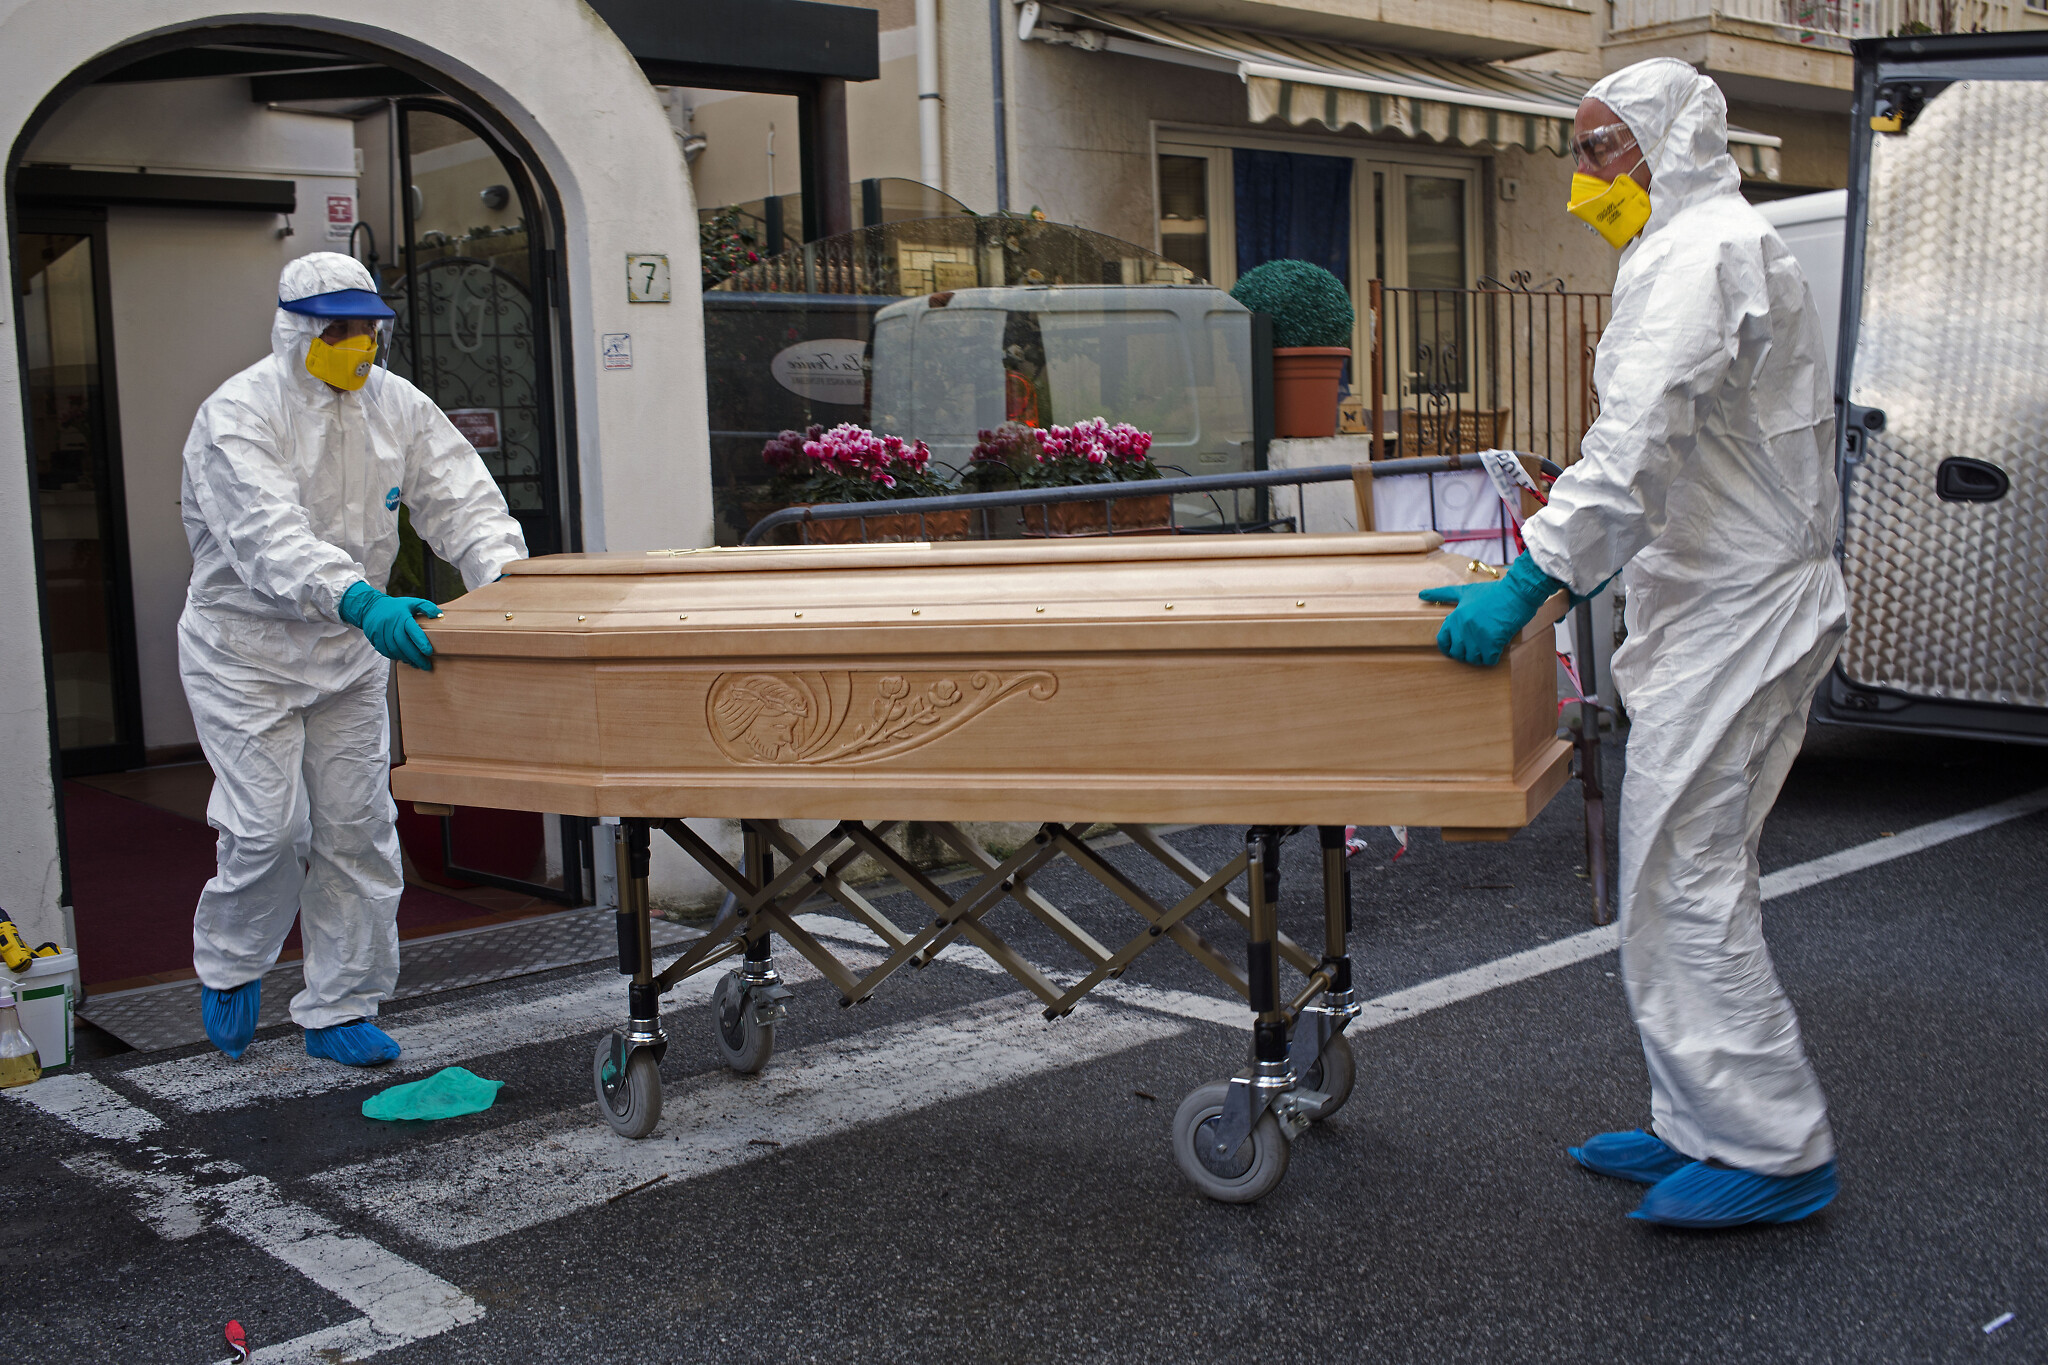 Italy coronavirus death toll jumps to 52; 4 dead in France | The ...